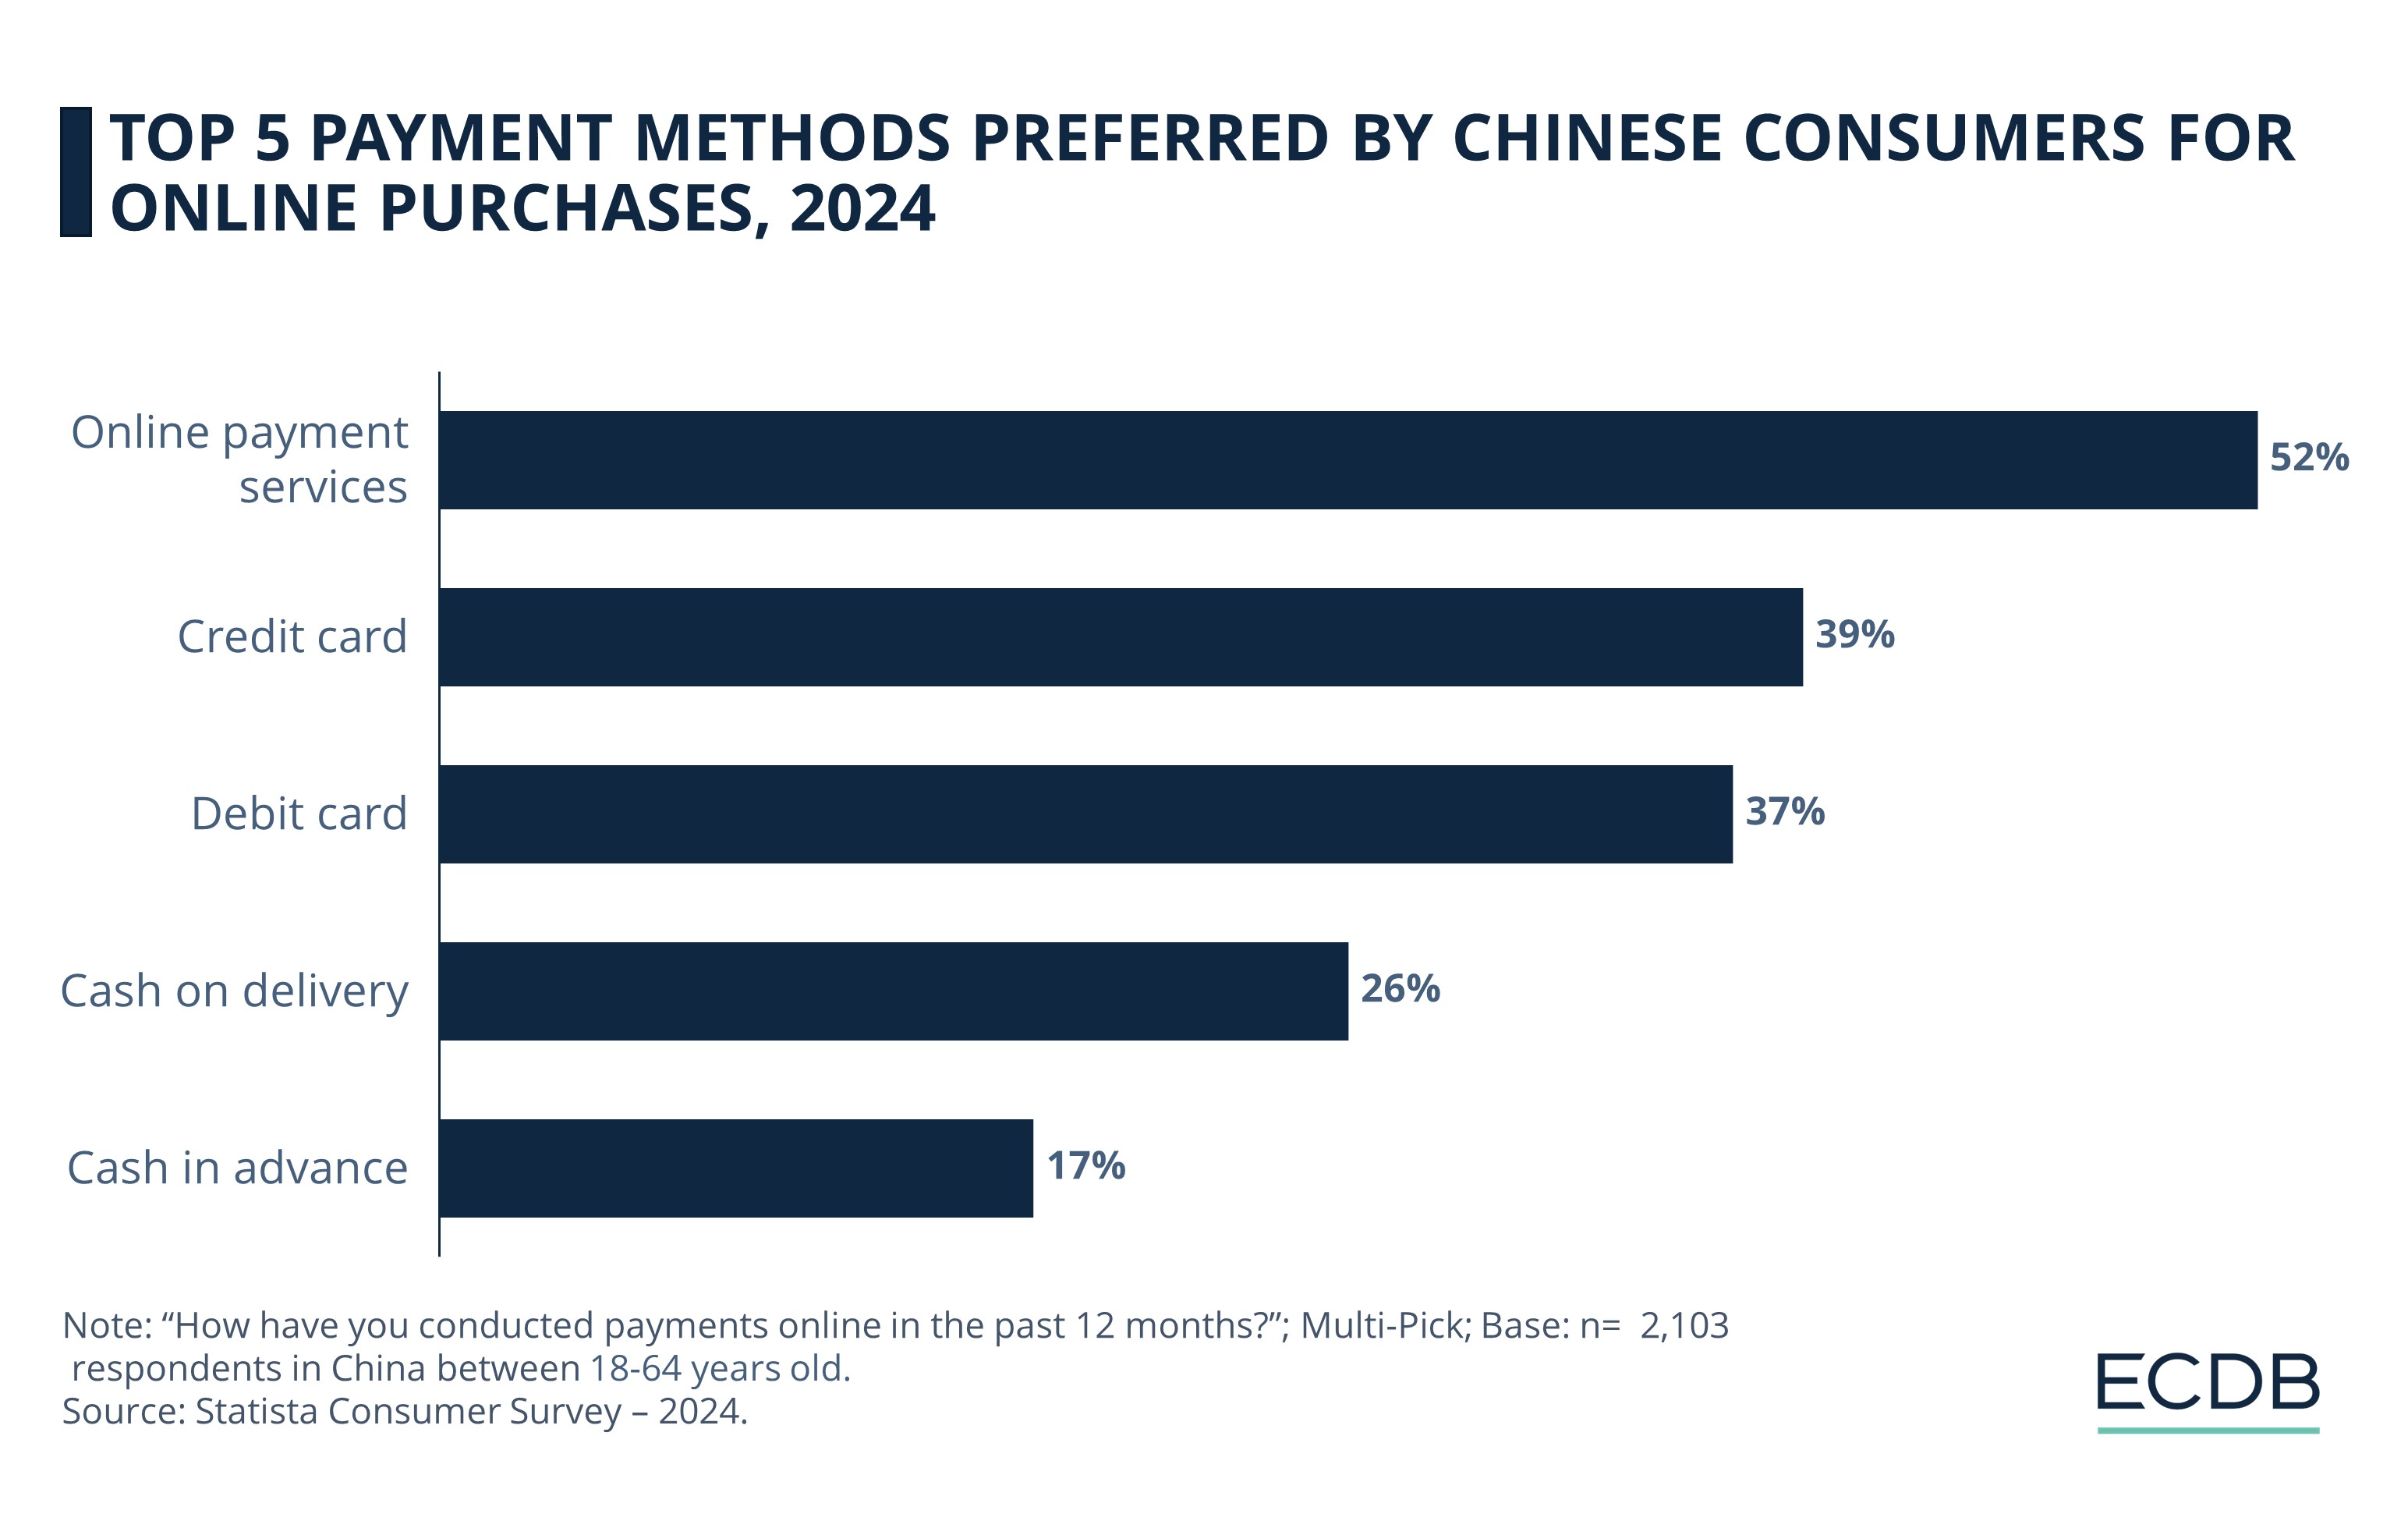 Top 5 Payment Methods Preferred by Chinese Consumers For Online Purchases, 2024